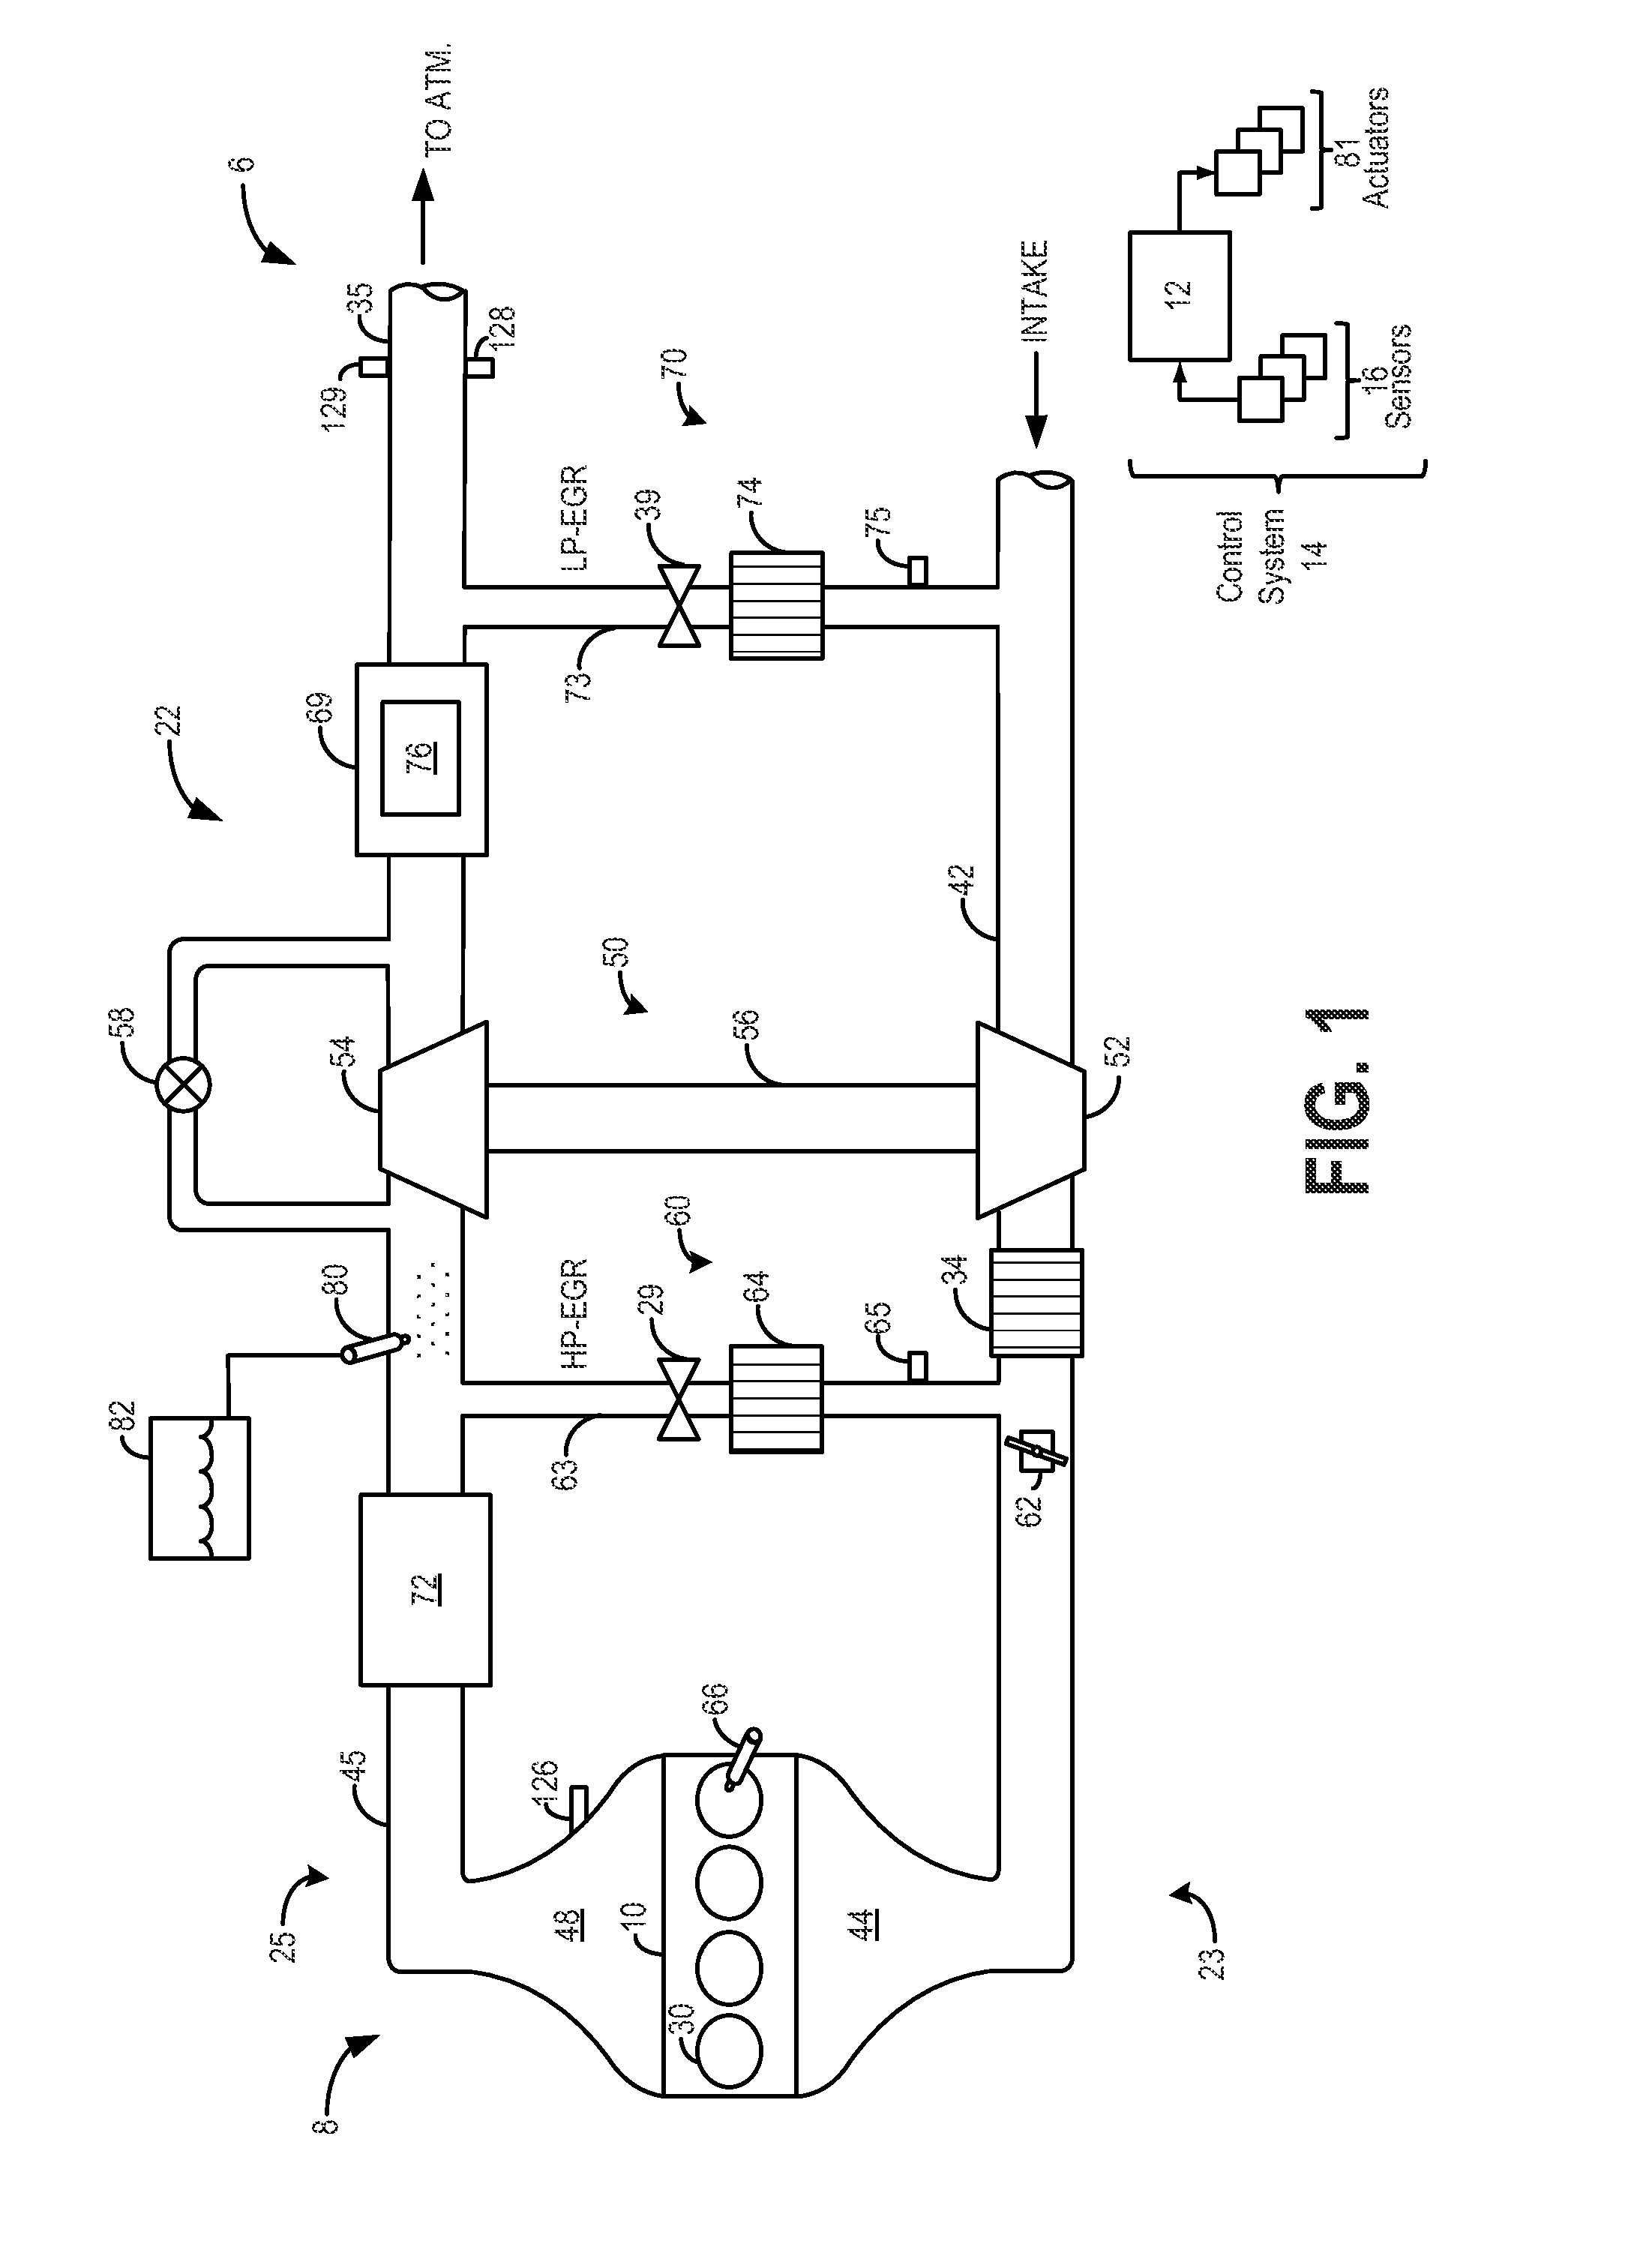 Methods and systems for emission system control